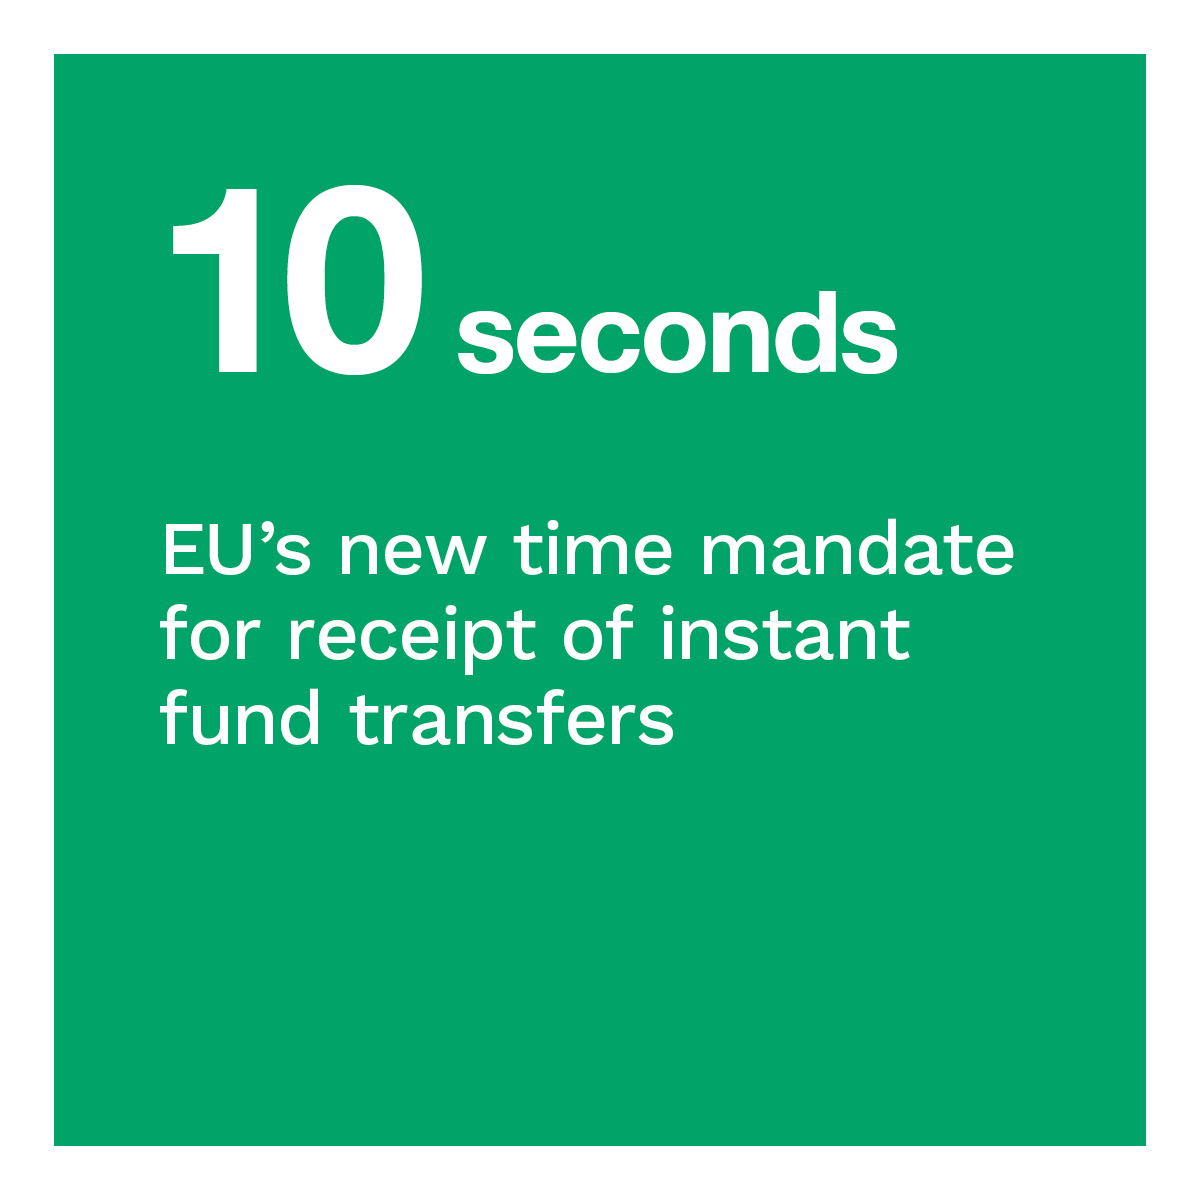 10 seconds: EU’s new time mandate for receipt of instant fund transfers